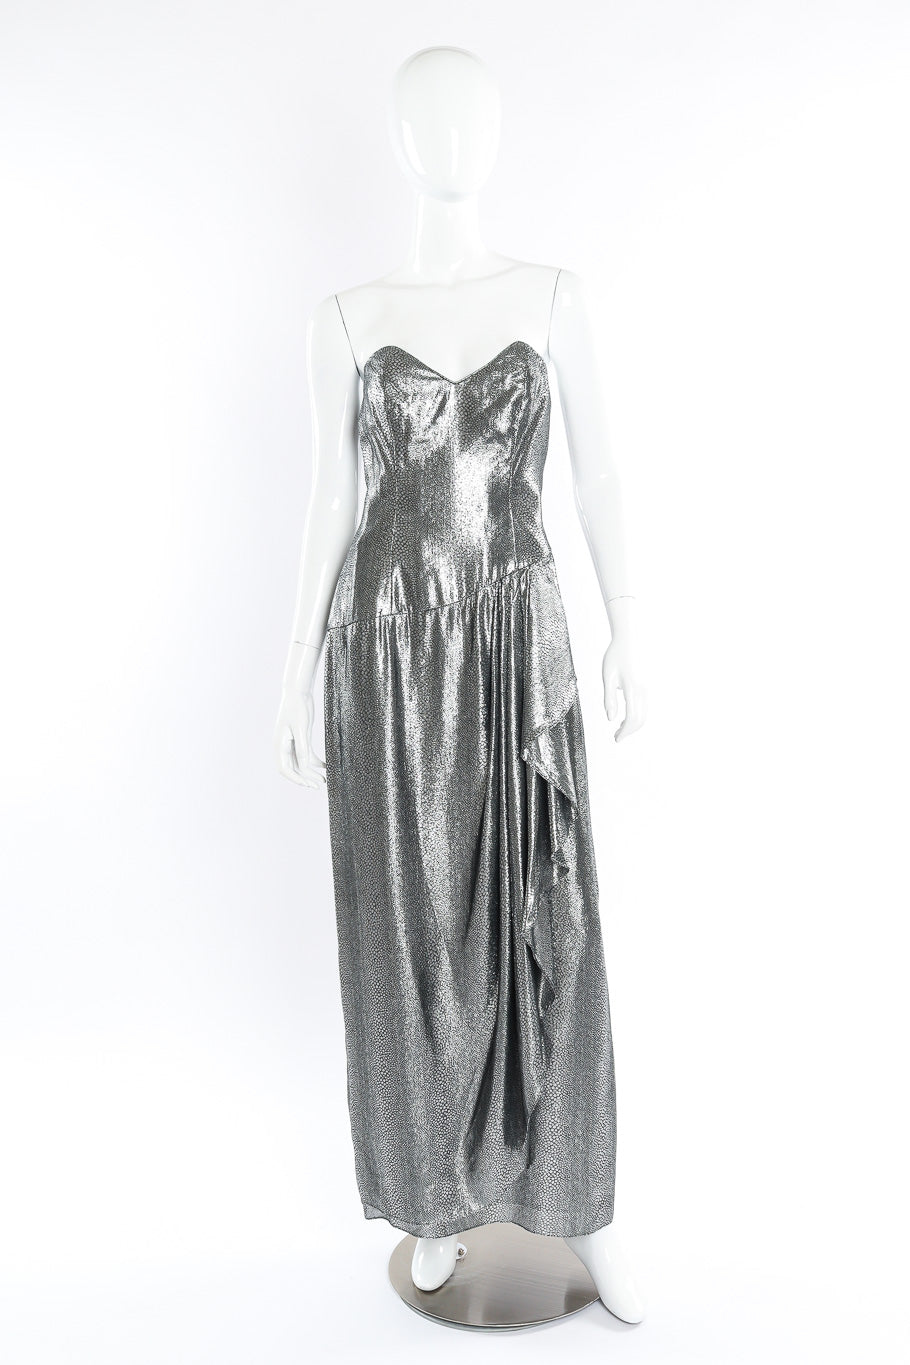 Metallic dress by Tracy Mills on mannequin full front @recessla